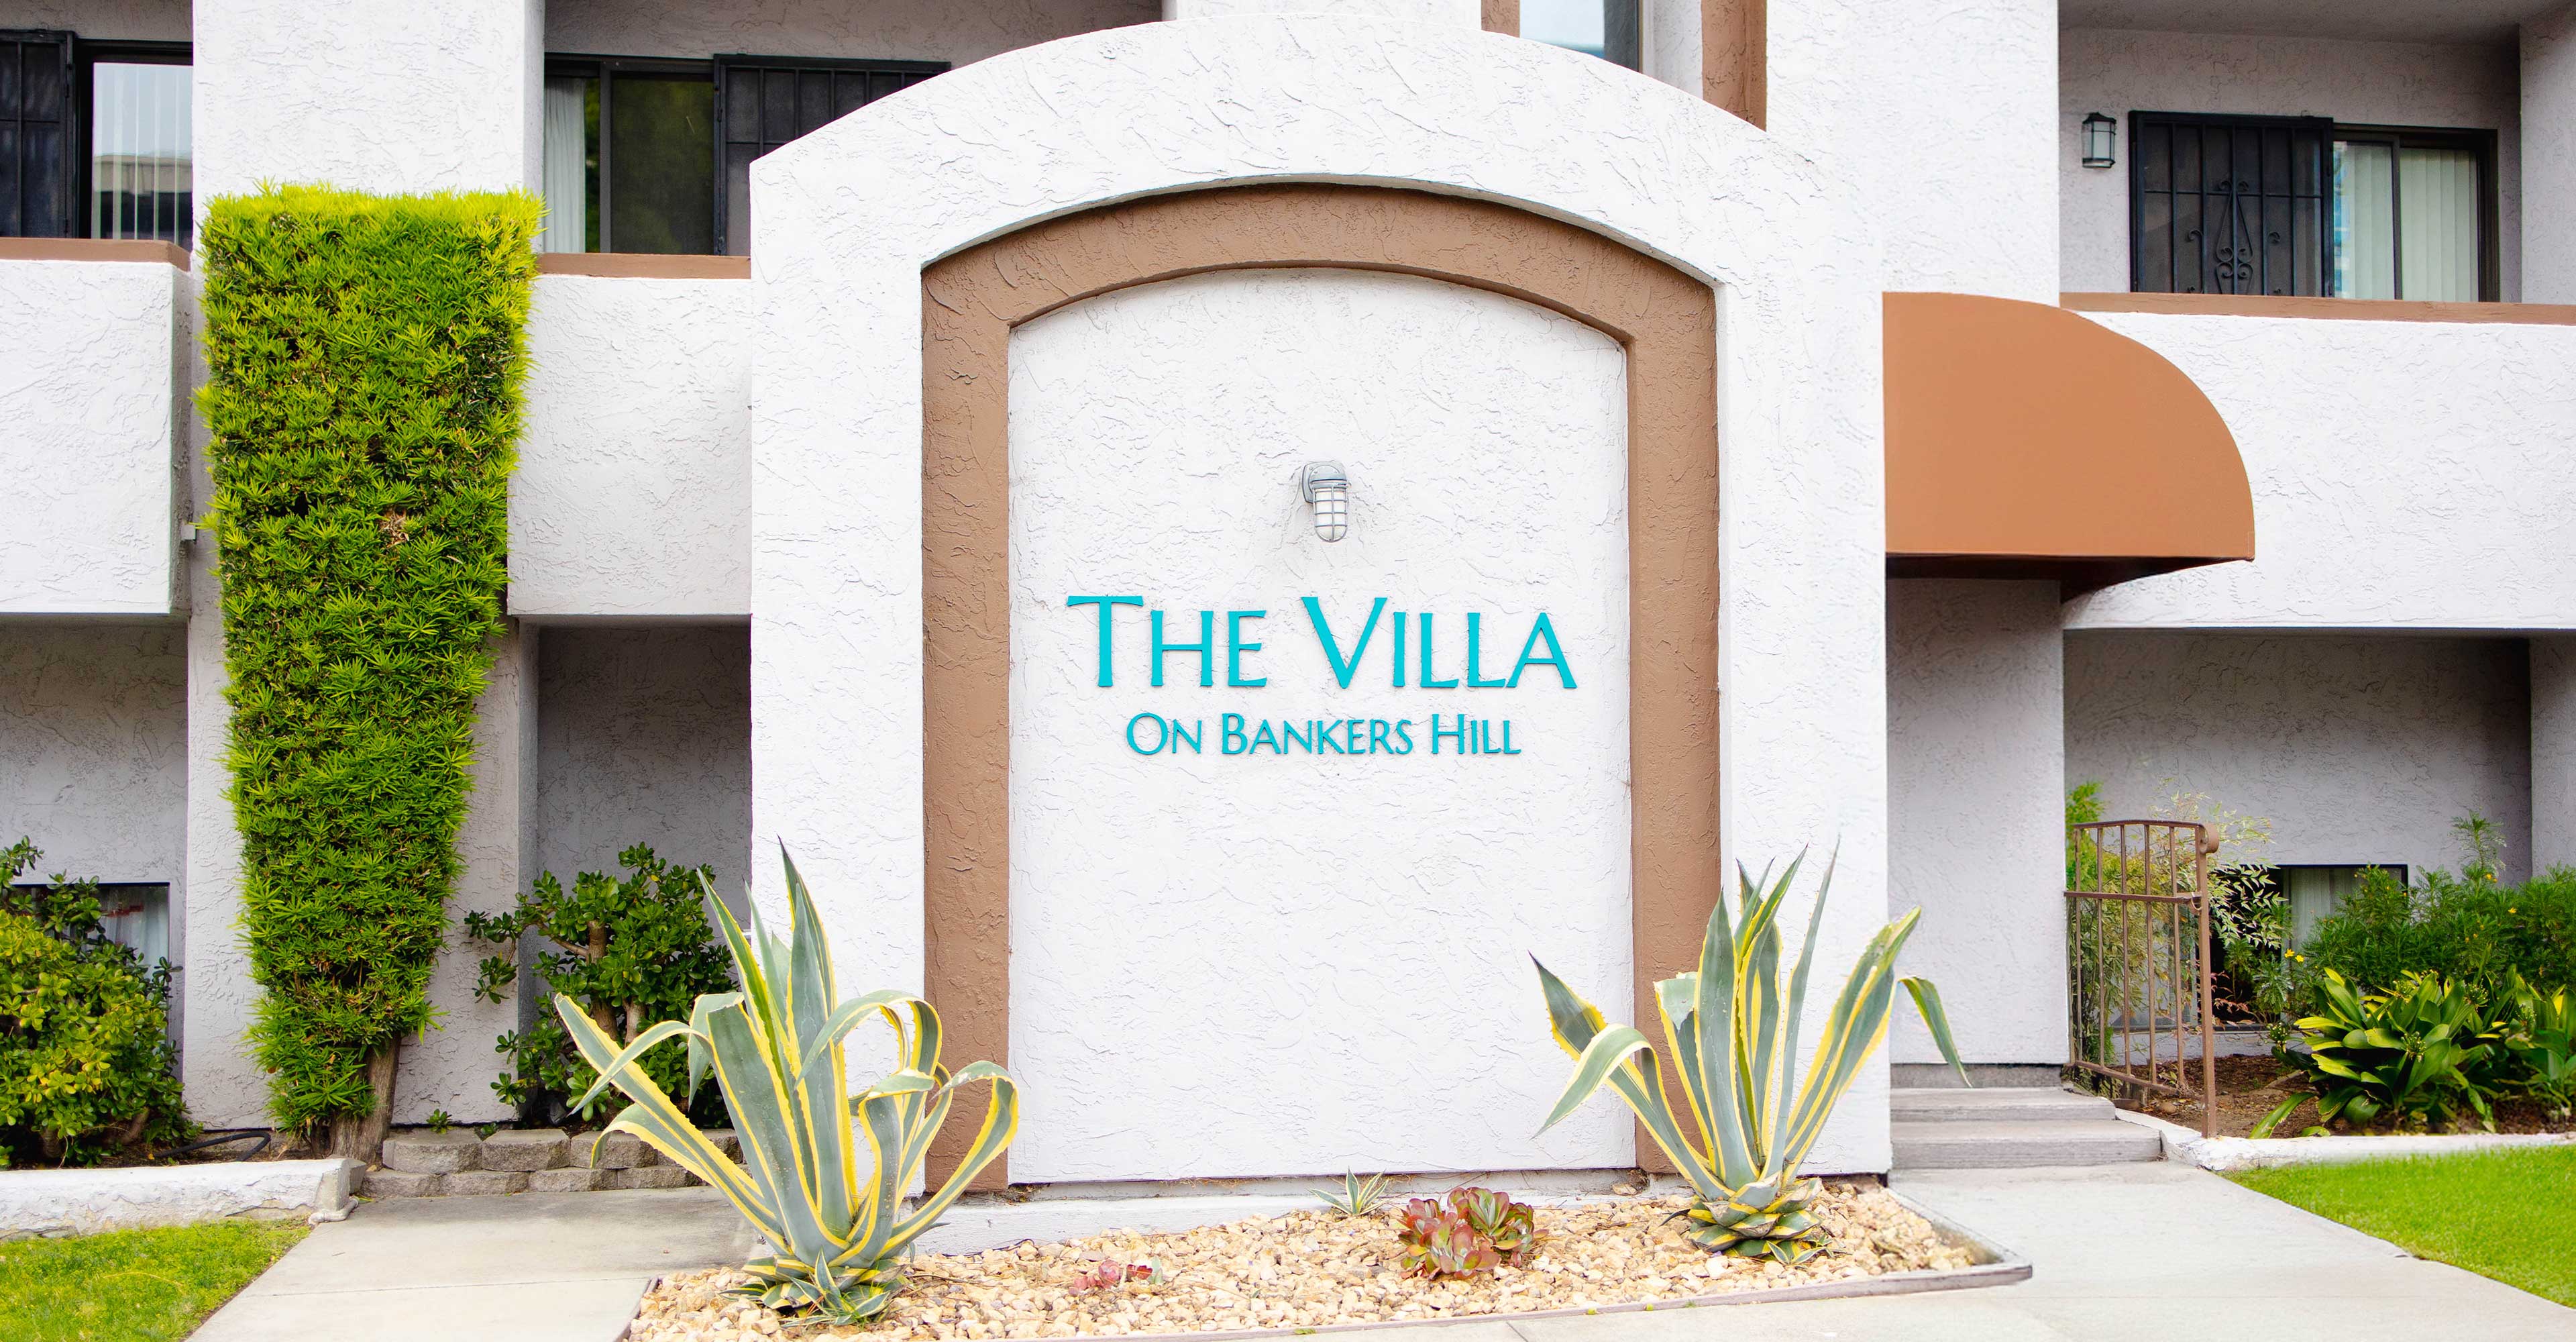 The Villa on Bankers Hill building entrance